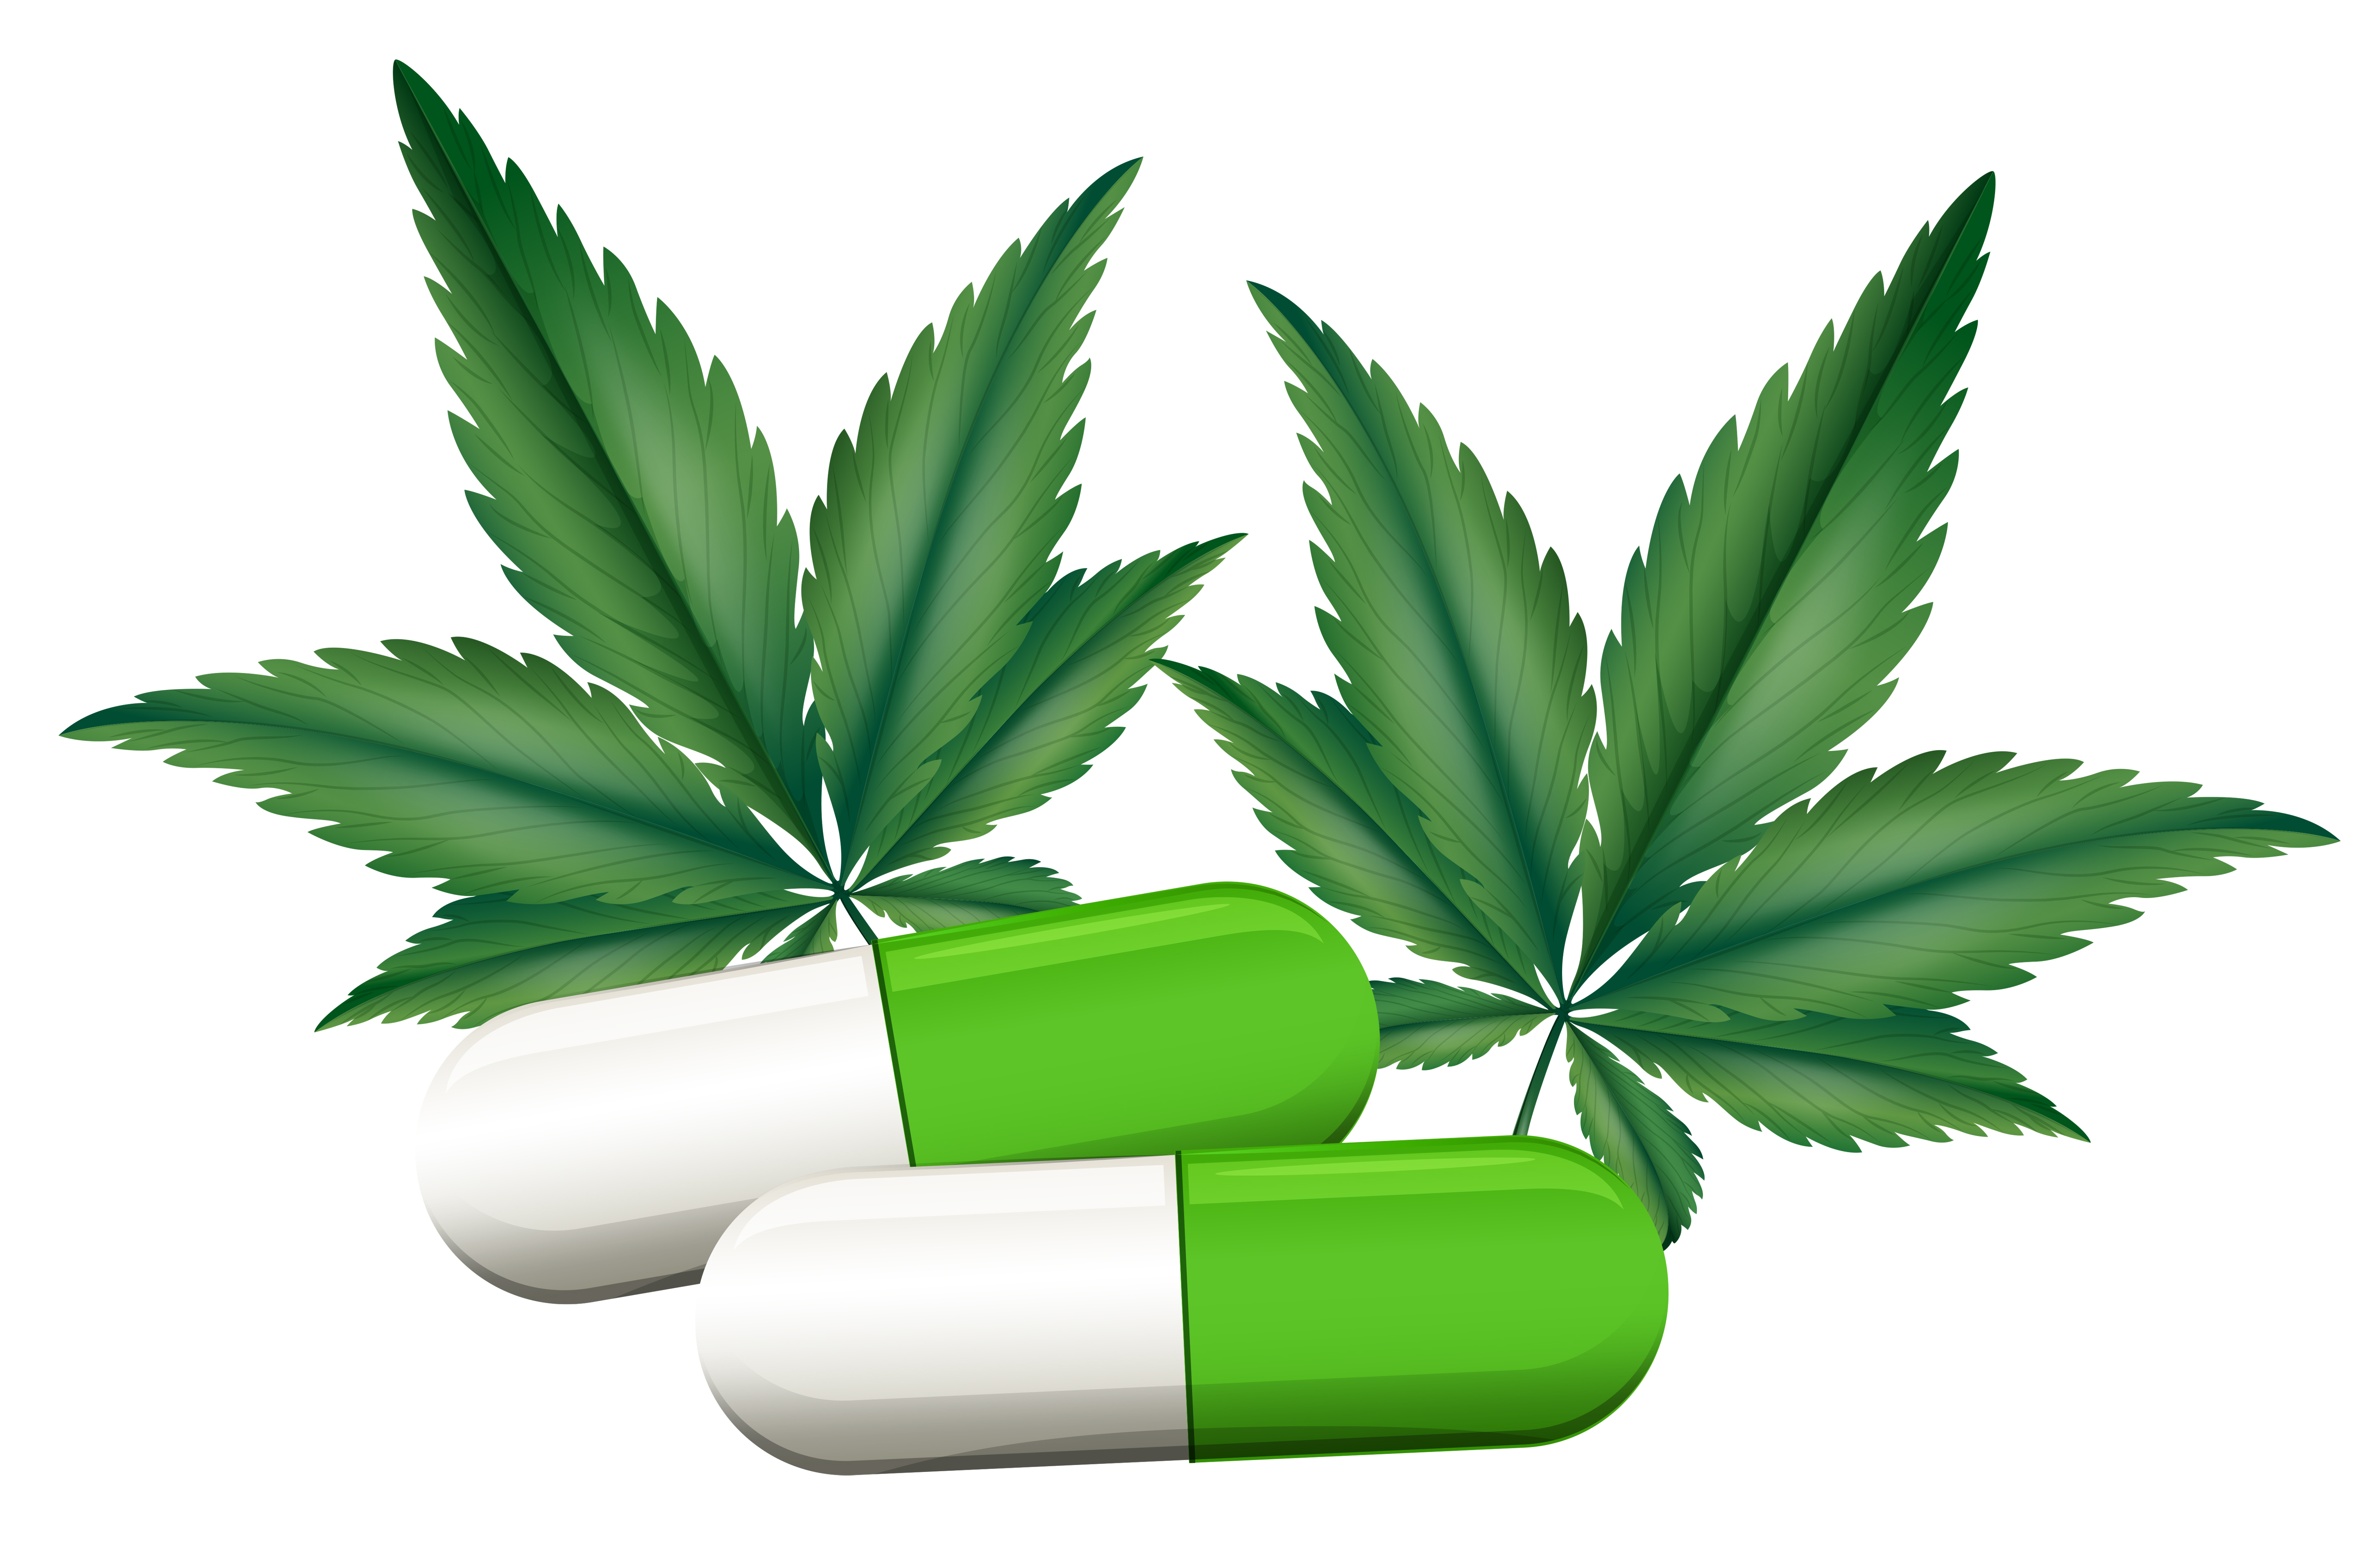 Cannabinoids for neuropathic pain conditions